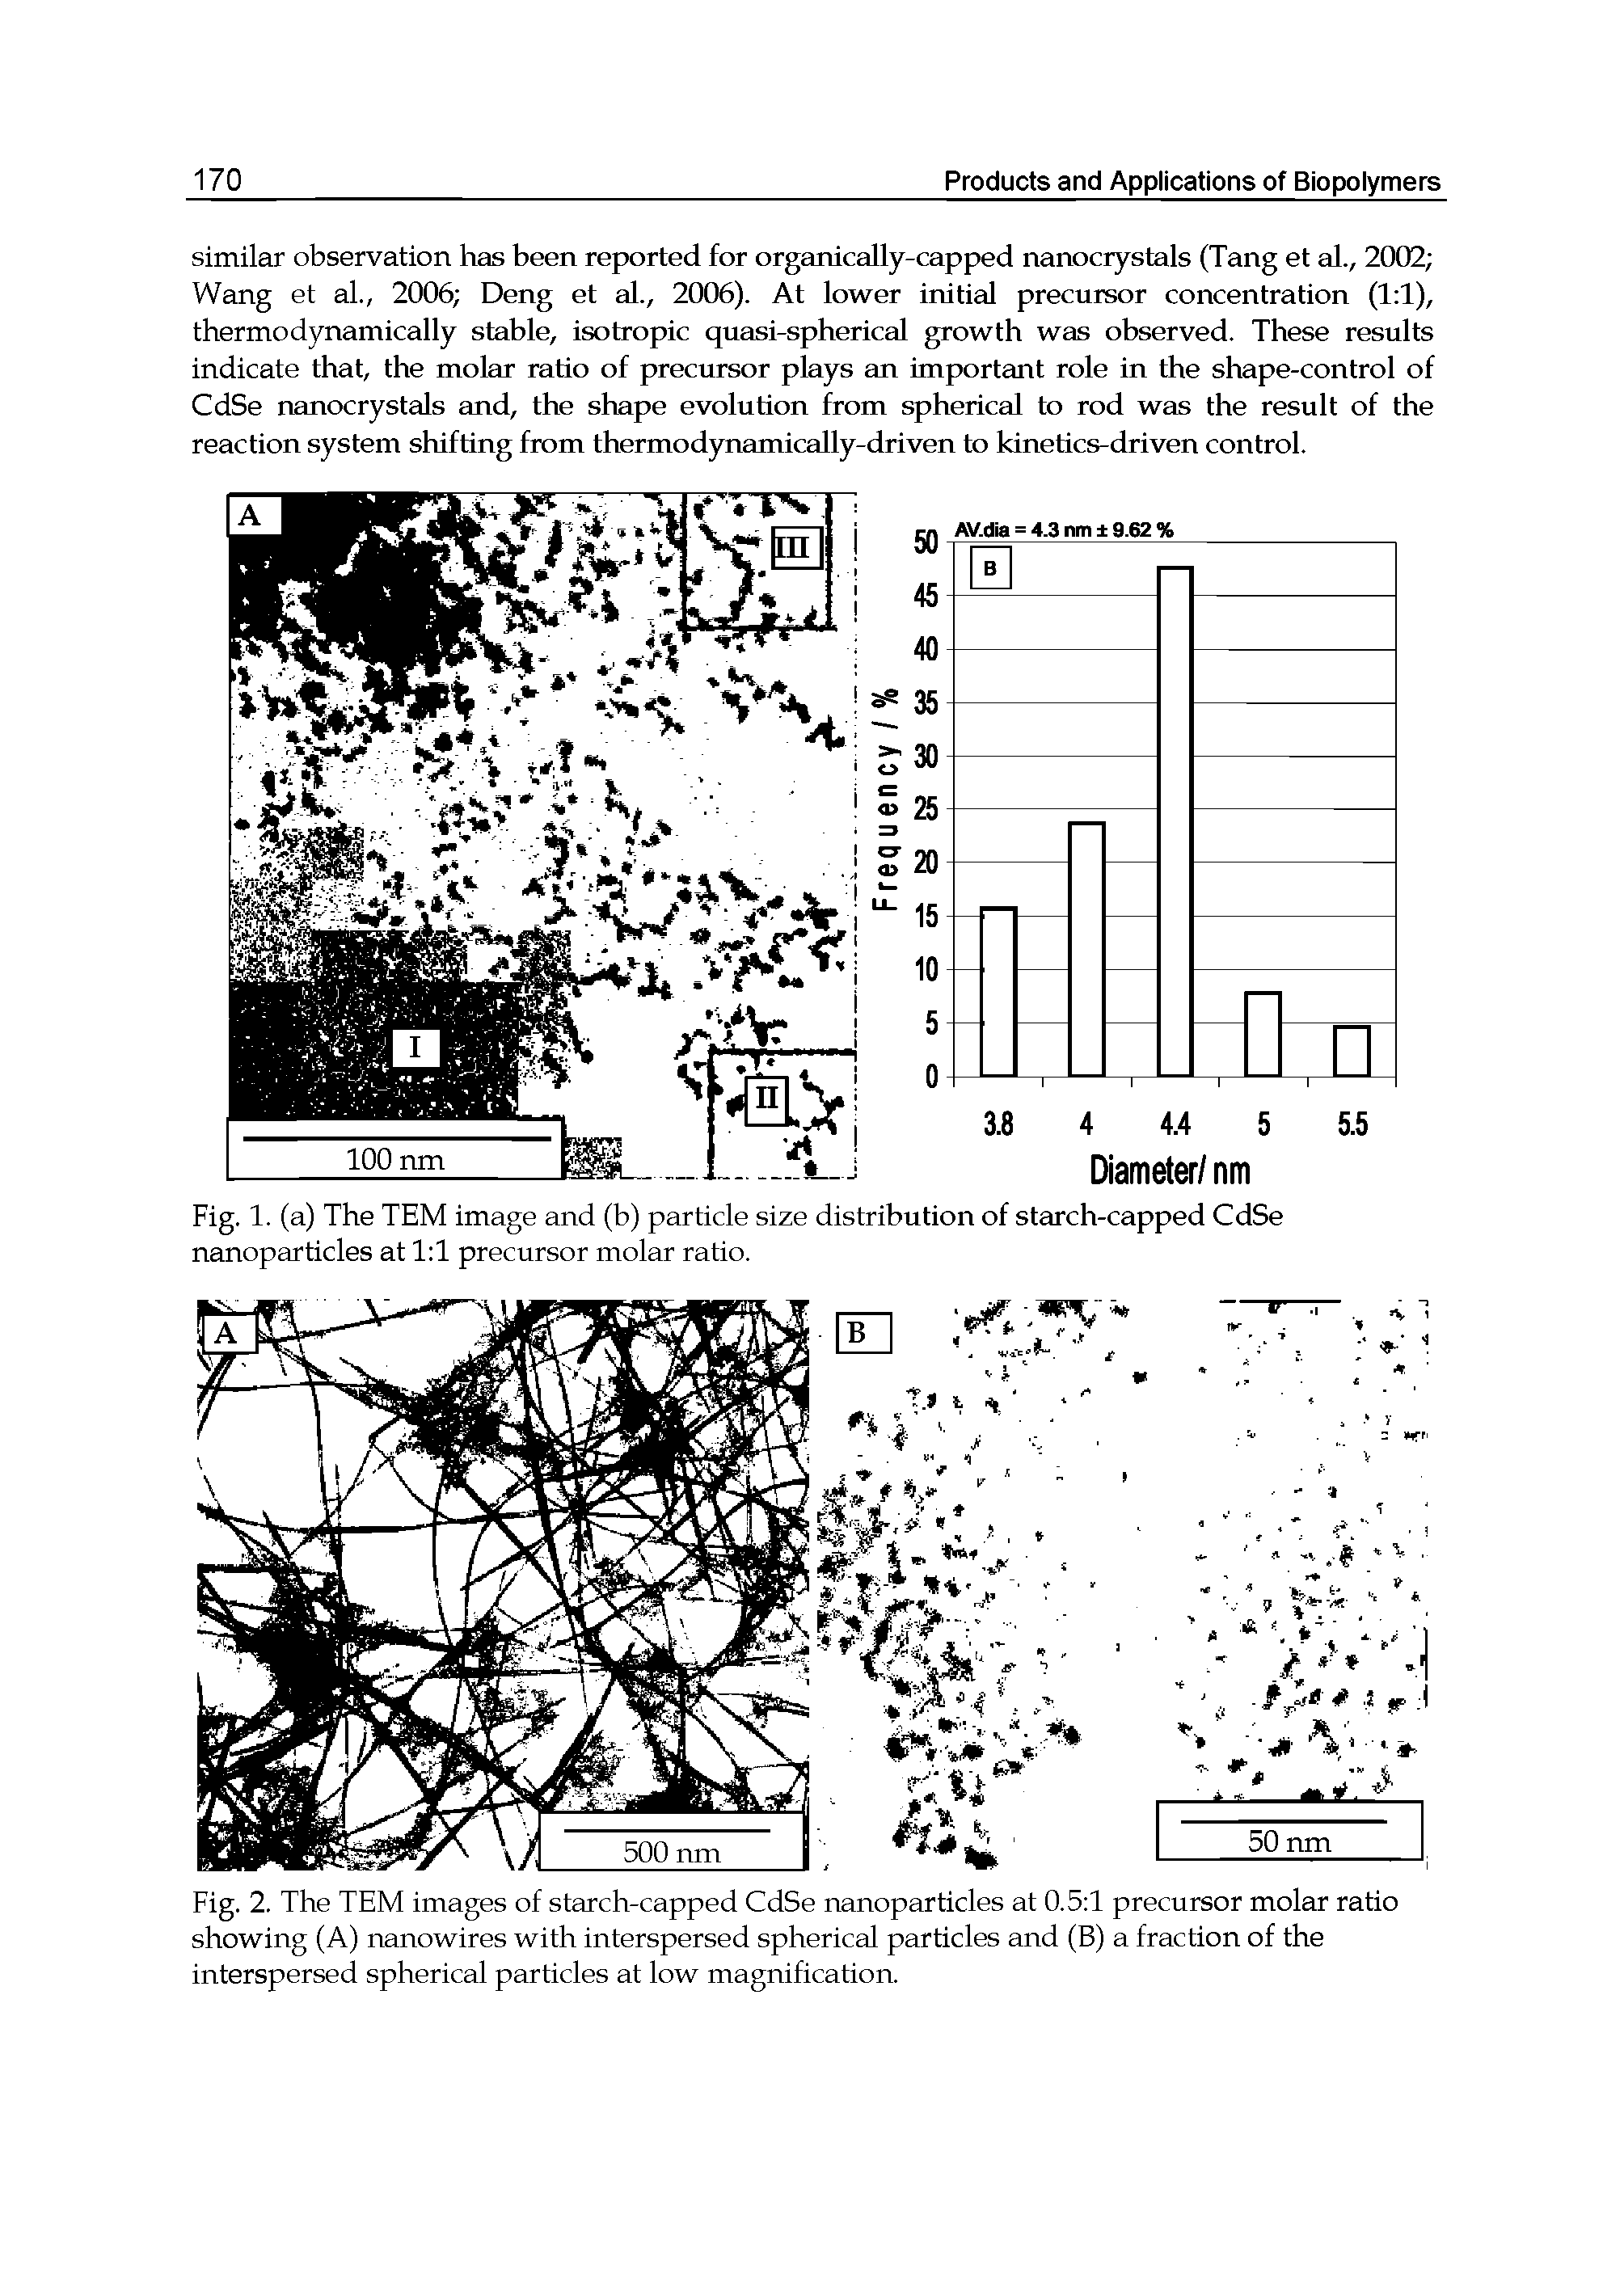 Fig. 2. The TEM images of starch-capped CdSe nanoparticles at 0.5 1 precursor molar ratio showing (A) nanowires with interspersed spherical particles and (B) a fraction of the interspersed spherical particles at low magnification.